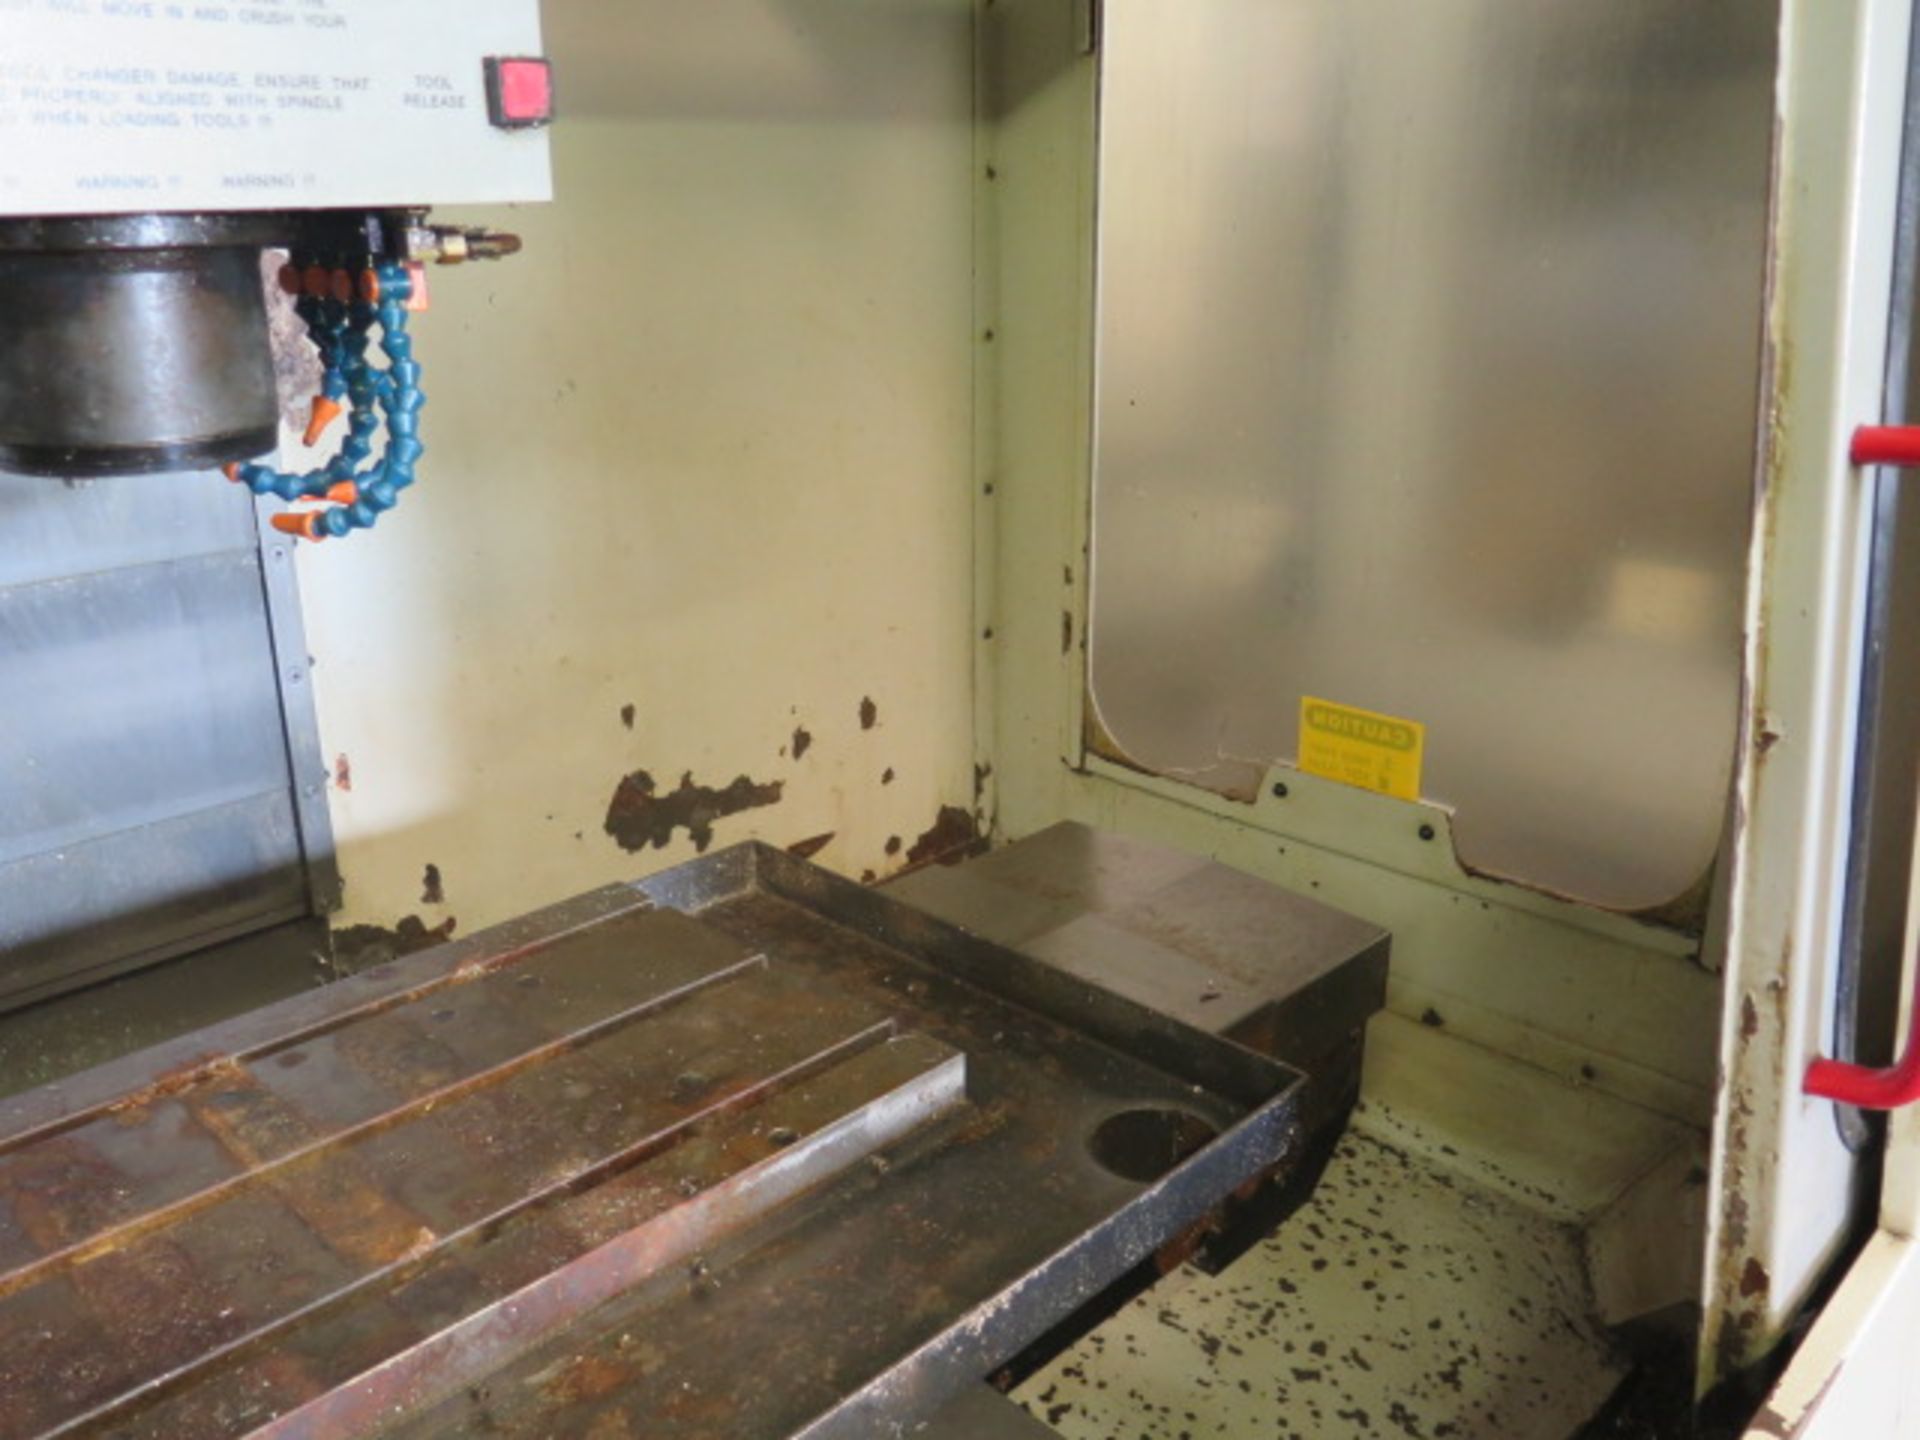 1996 Haas VF-E CNC VMC s/n 7719 w/ Haas Controls, 20-Station ATC, CAT-40 Taper, SOLD AS IS - Image 11 of 16